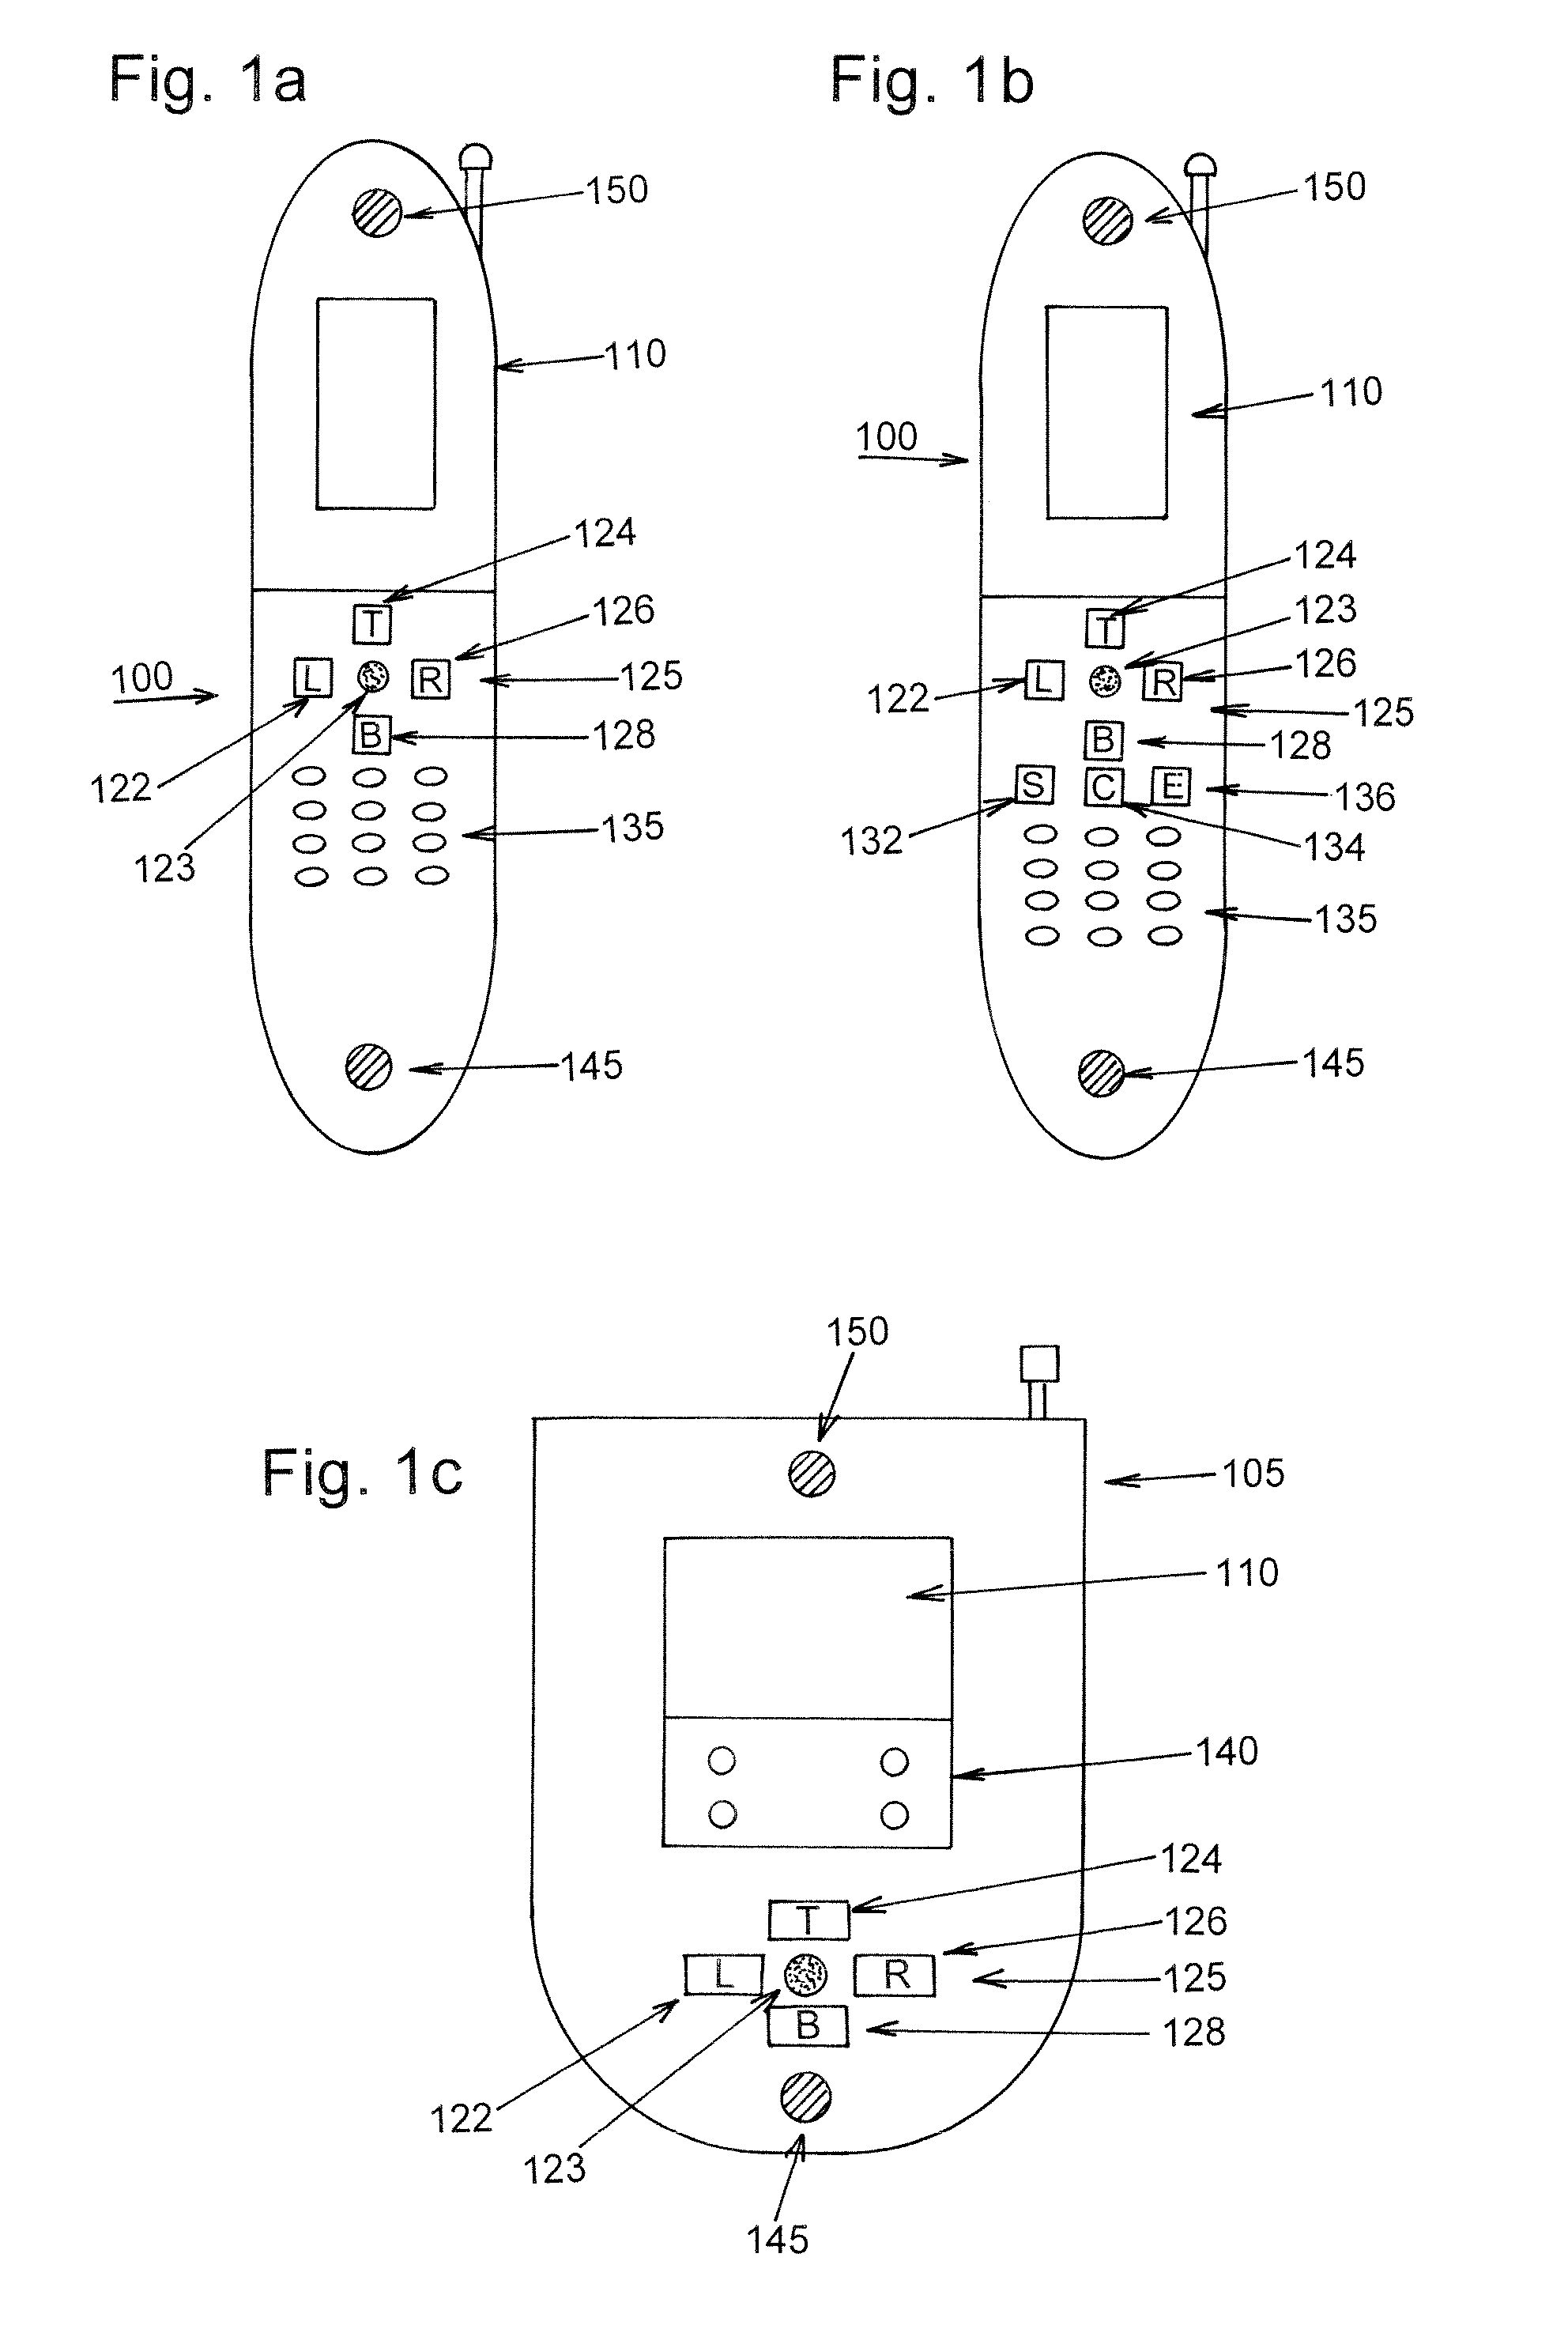 Method and device for providing a multi-level user interface having a dynamic key assignment for a cellularly communicative device